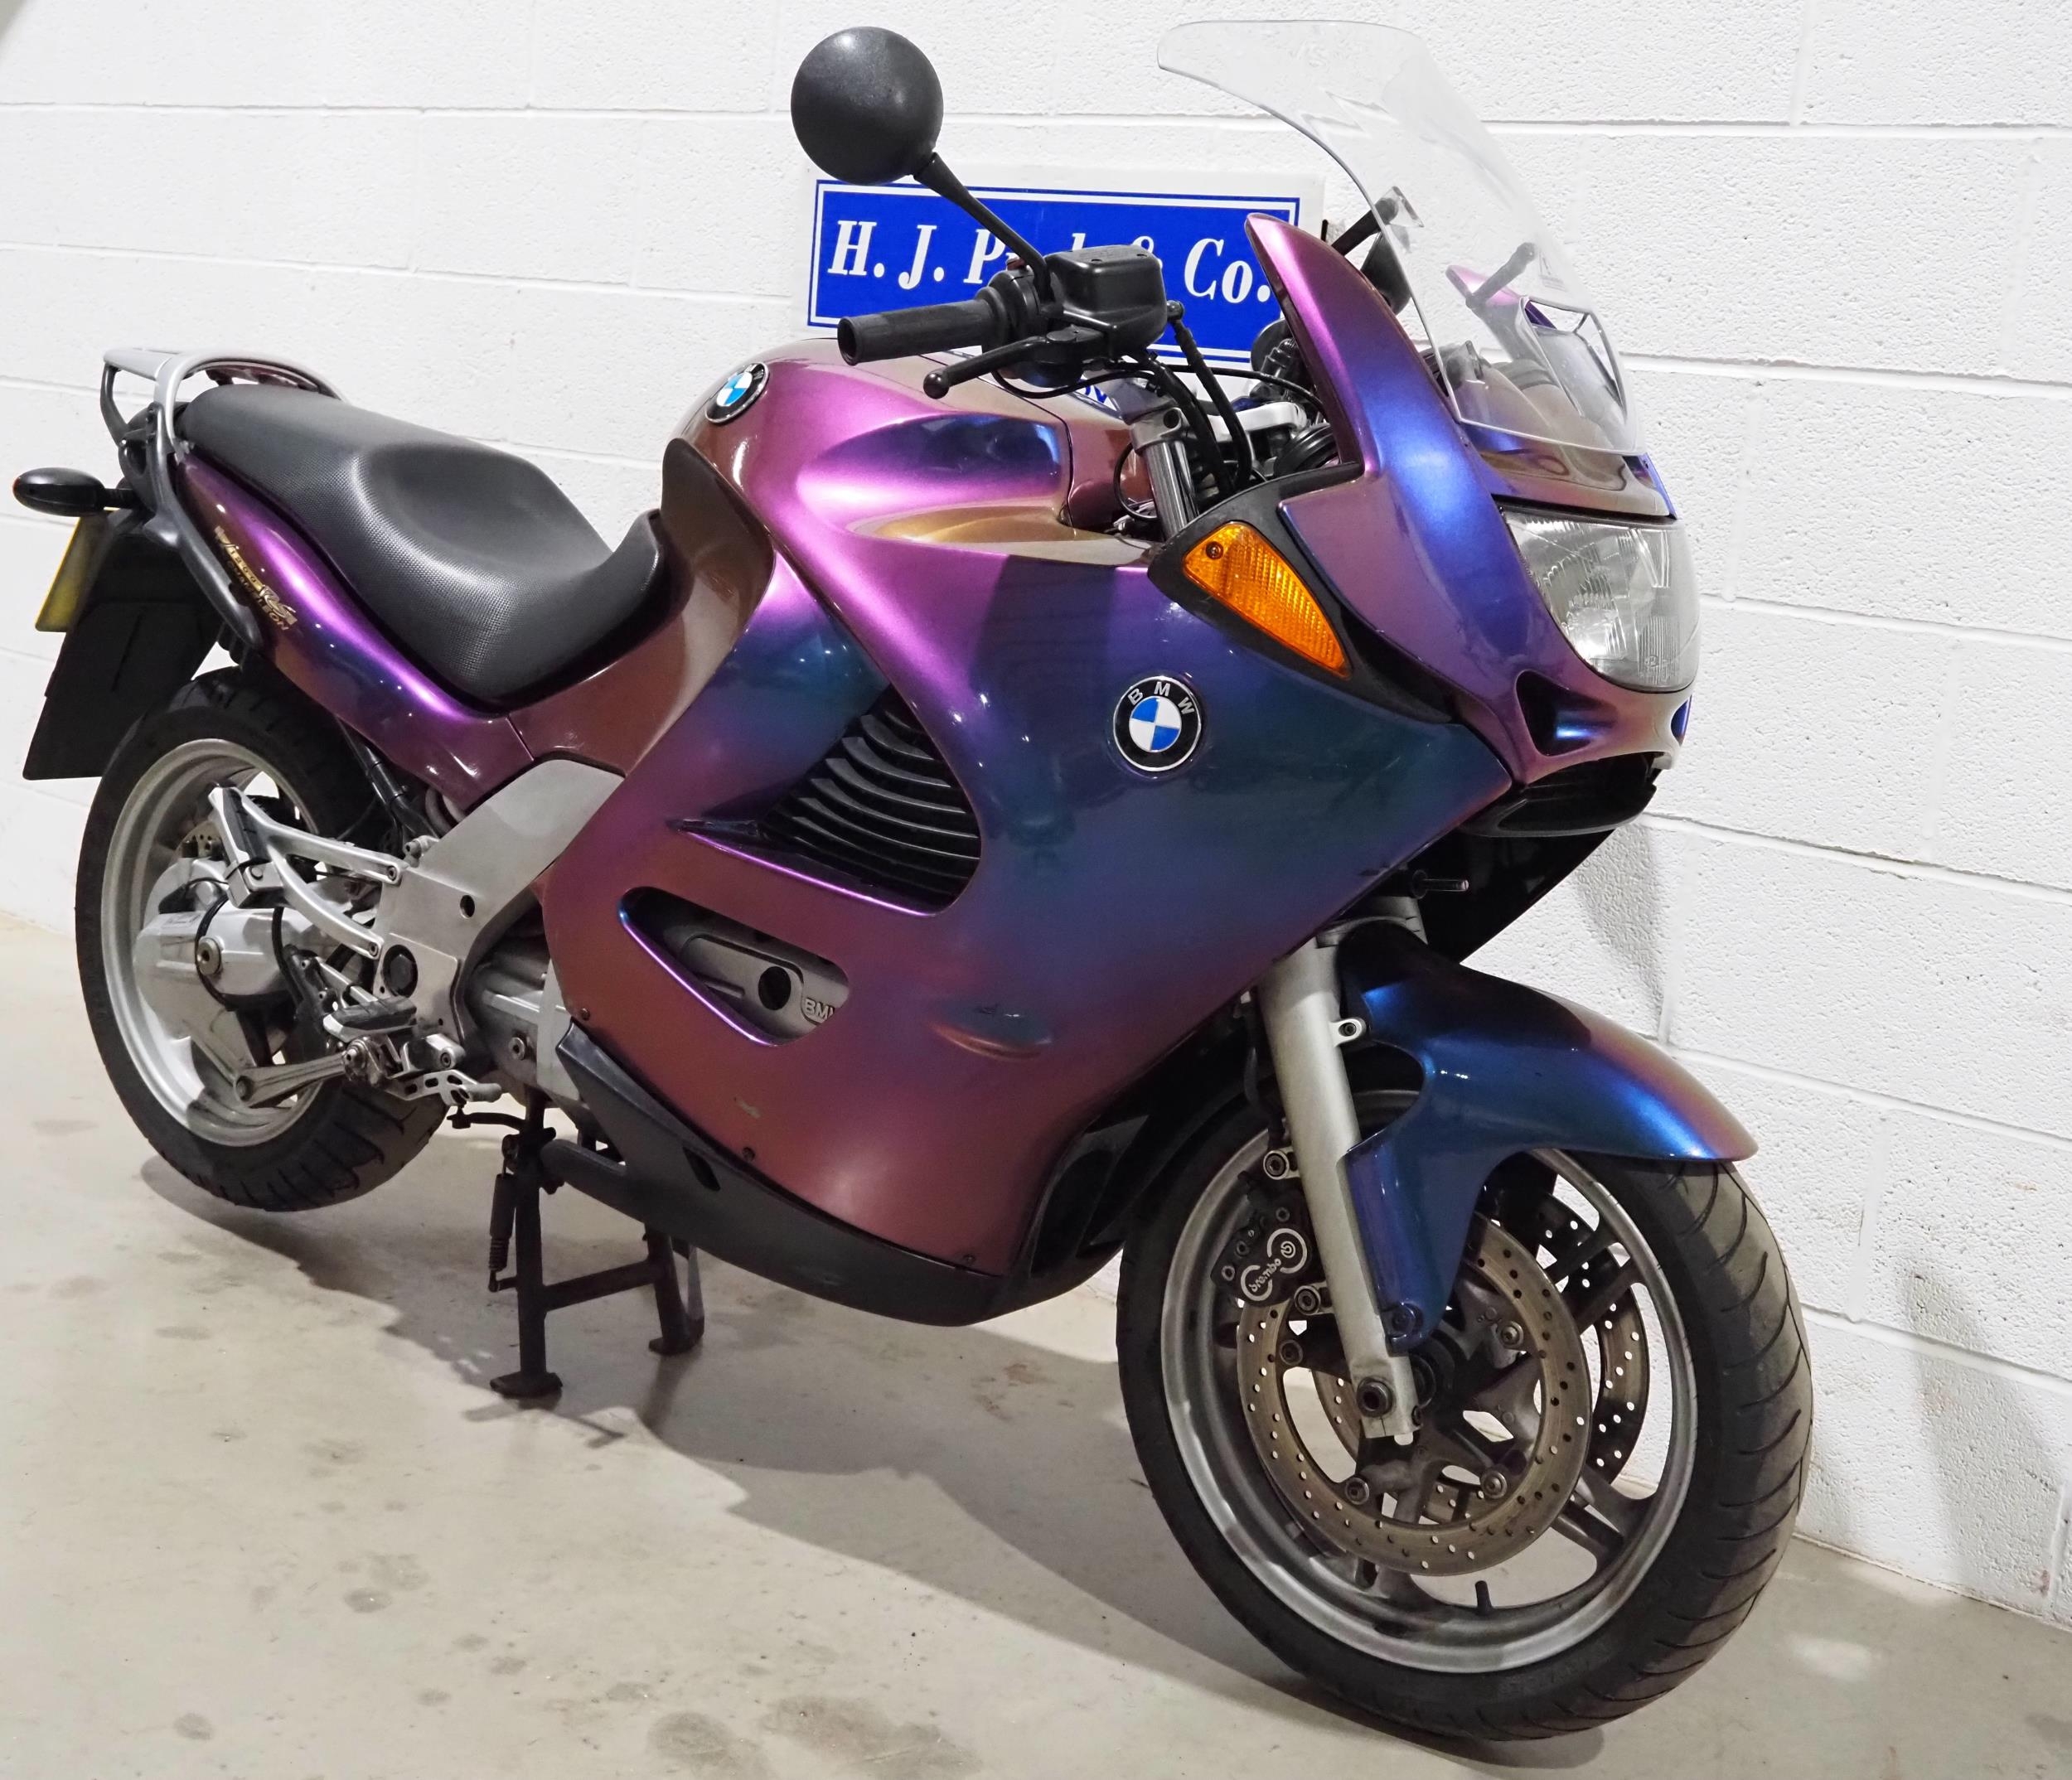 BMW K1200 RS motorcycle. 1997. 1171cc. Runs and rides, MOT until 18.03.25. Comes with heated - Image 2 of 6